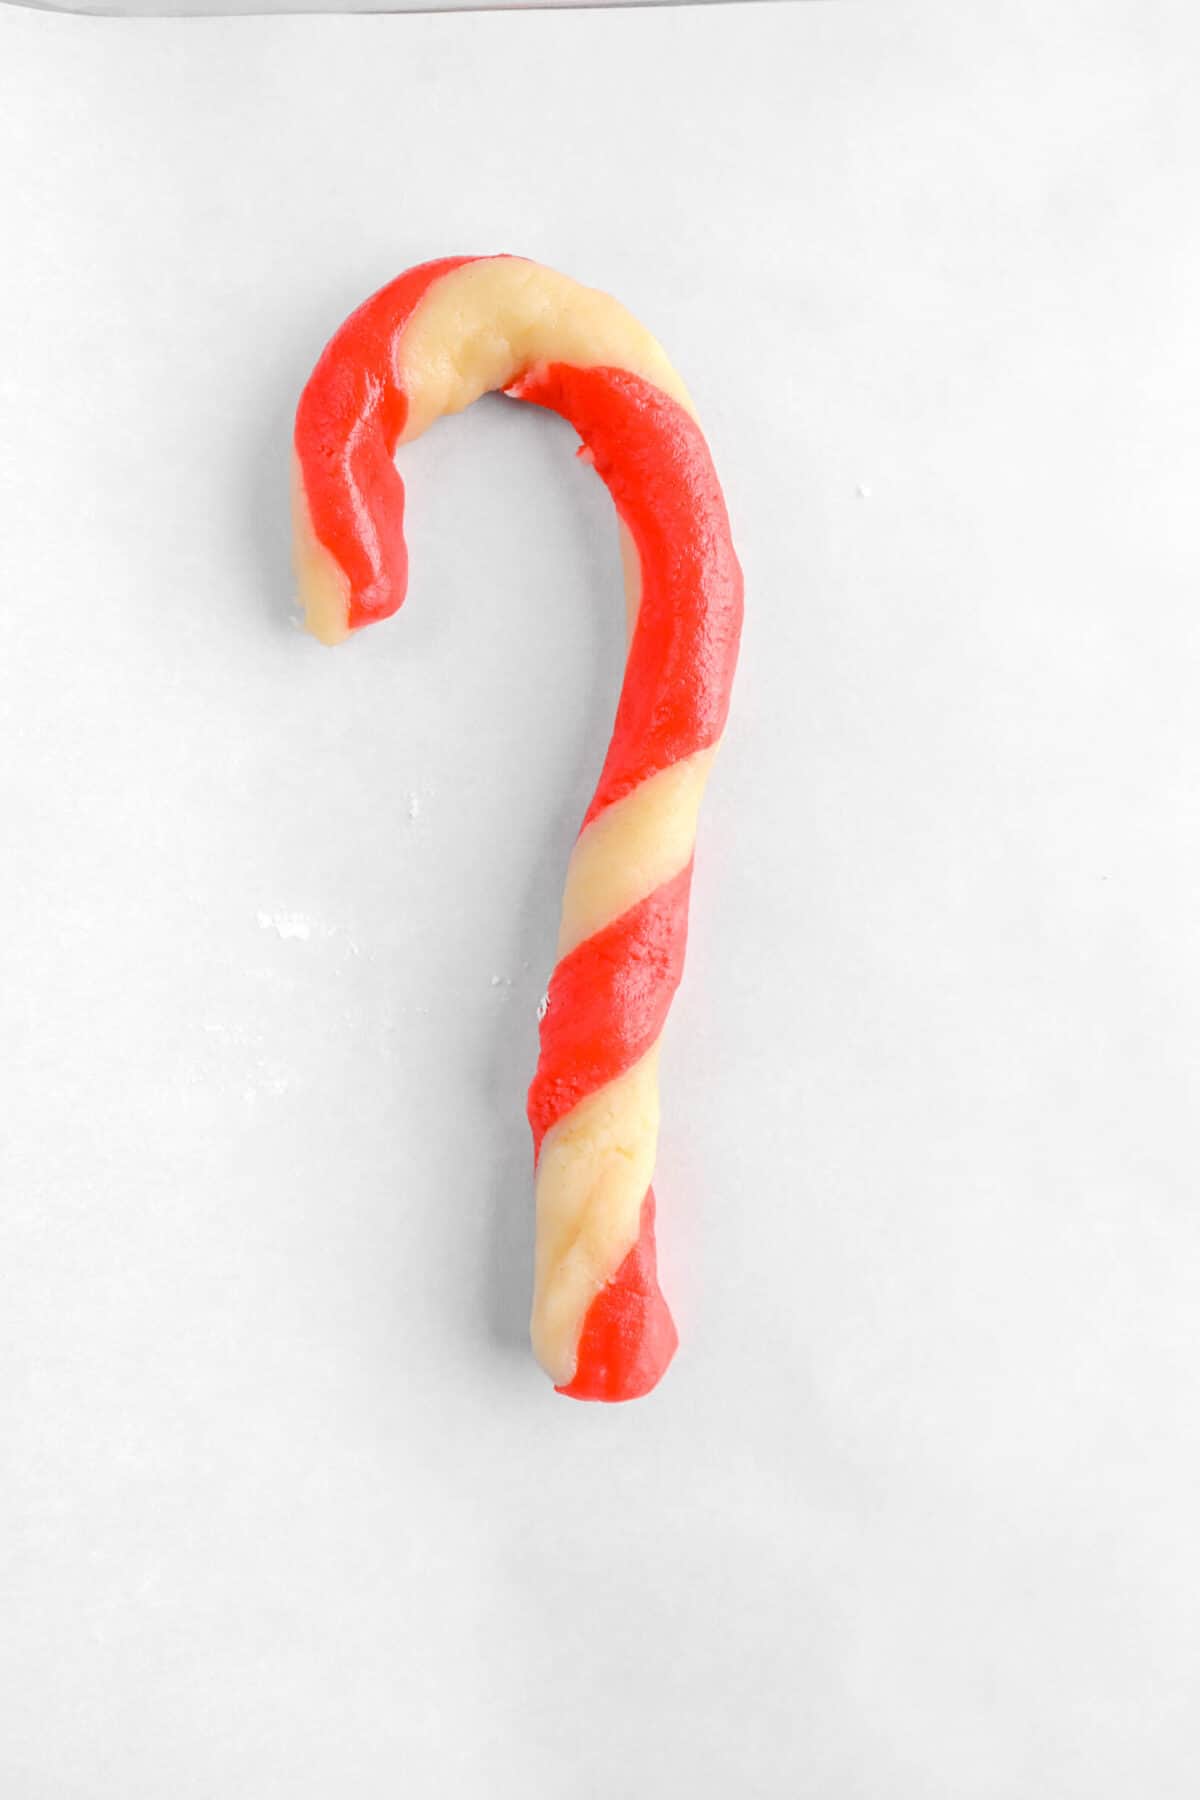 candy cane shaped cookie dough on parchment paper